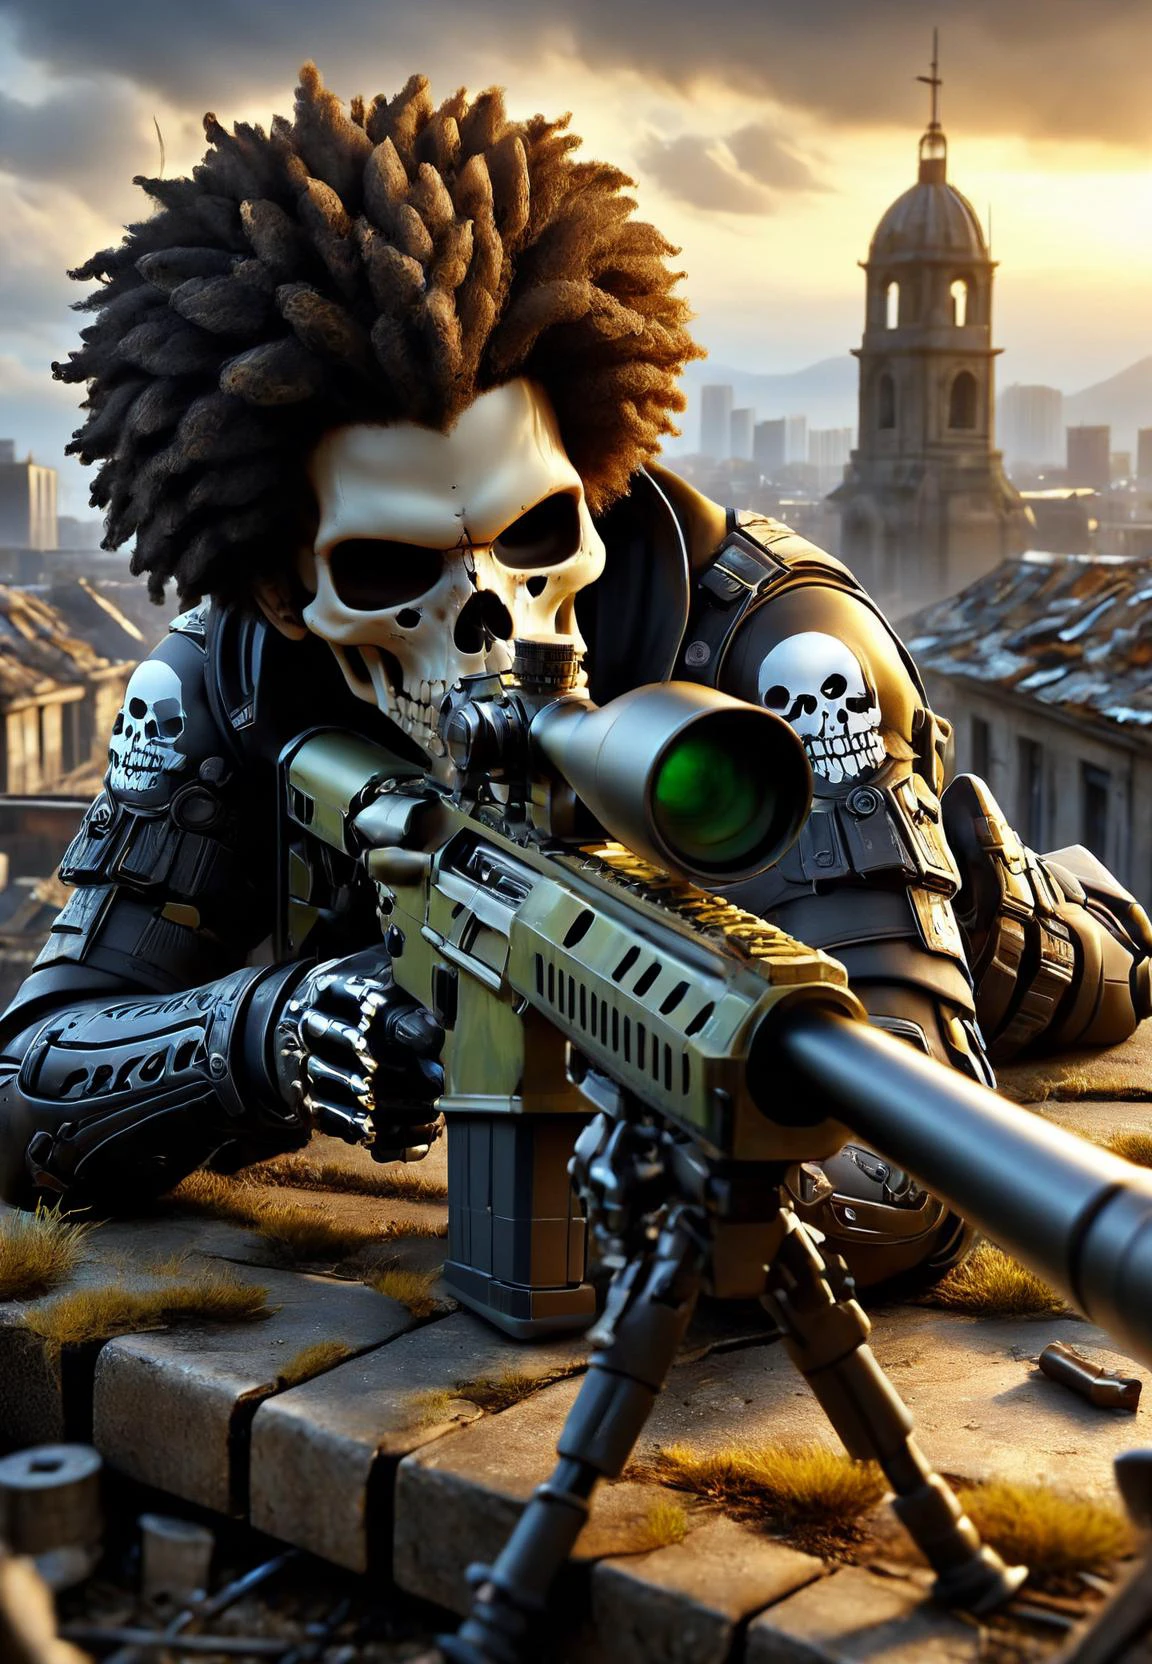 amazing quality, masterpiece, best quality, hyper detailed, ultra detailed, UHD, depth of field, detail eyes, from above, sky line,
a (skull:1.4) with afro hair laying on the roof, camouflage suit, aiming at the camera, action shot, reflective light, old buildings, abandoned city, war,
Sniper Rifle, cartridge case,
